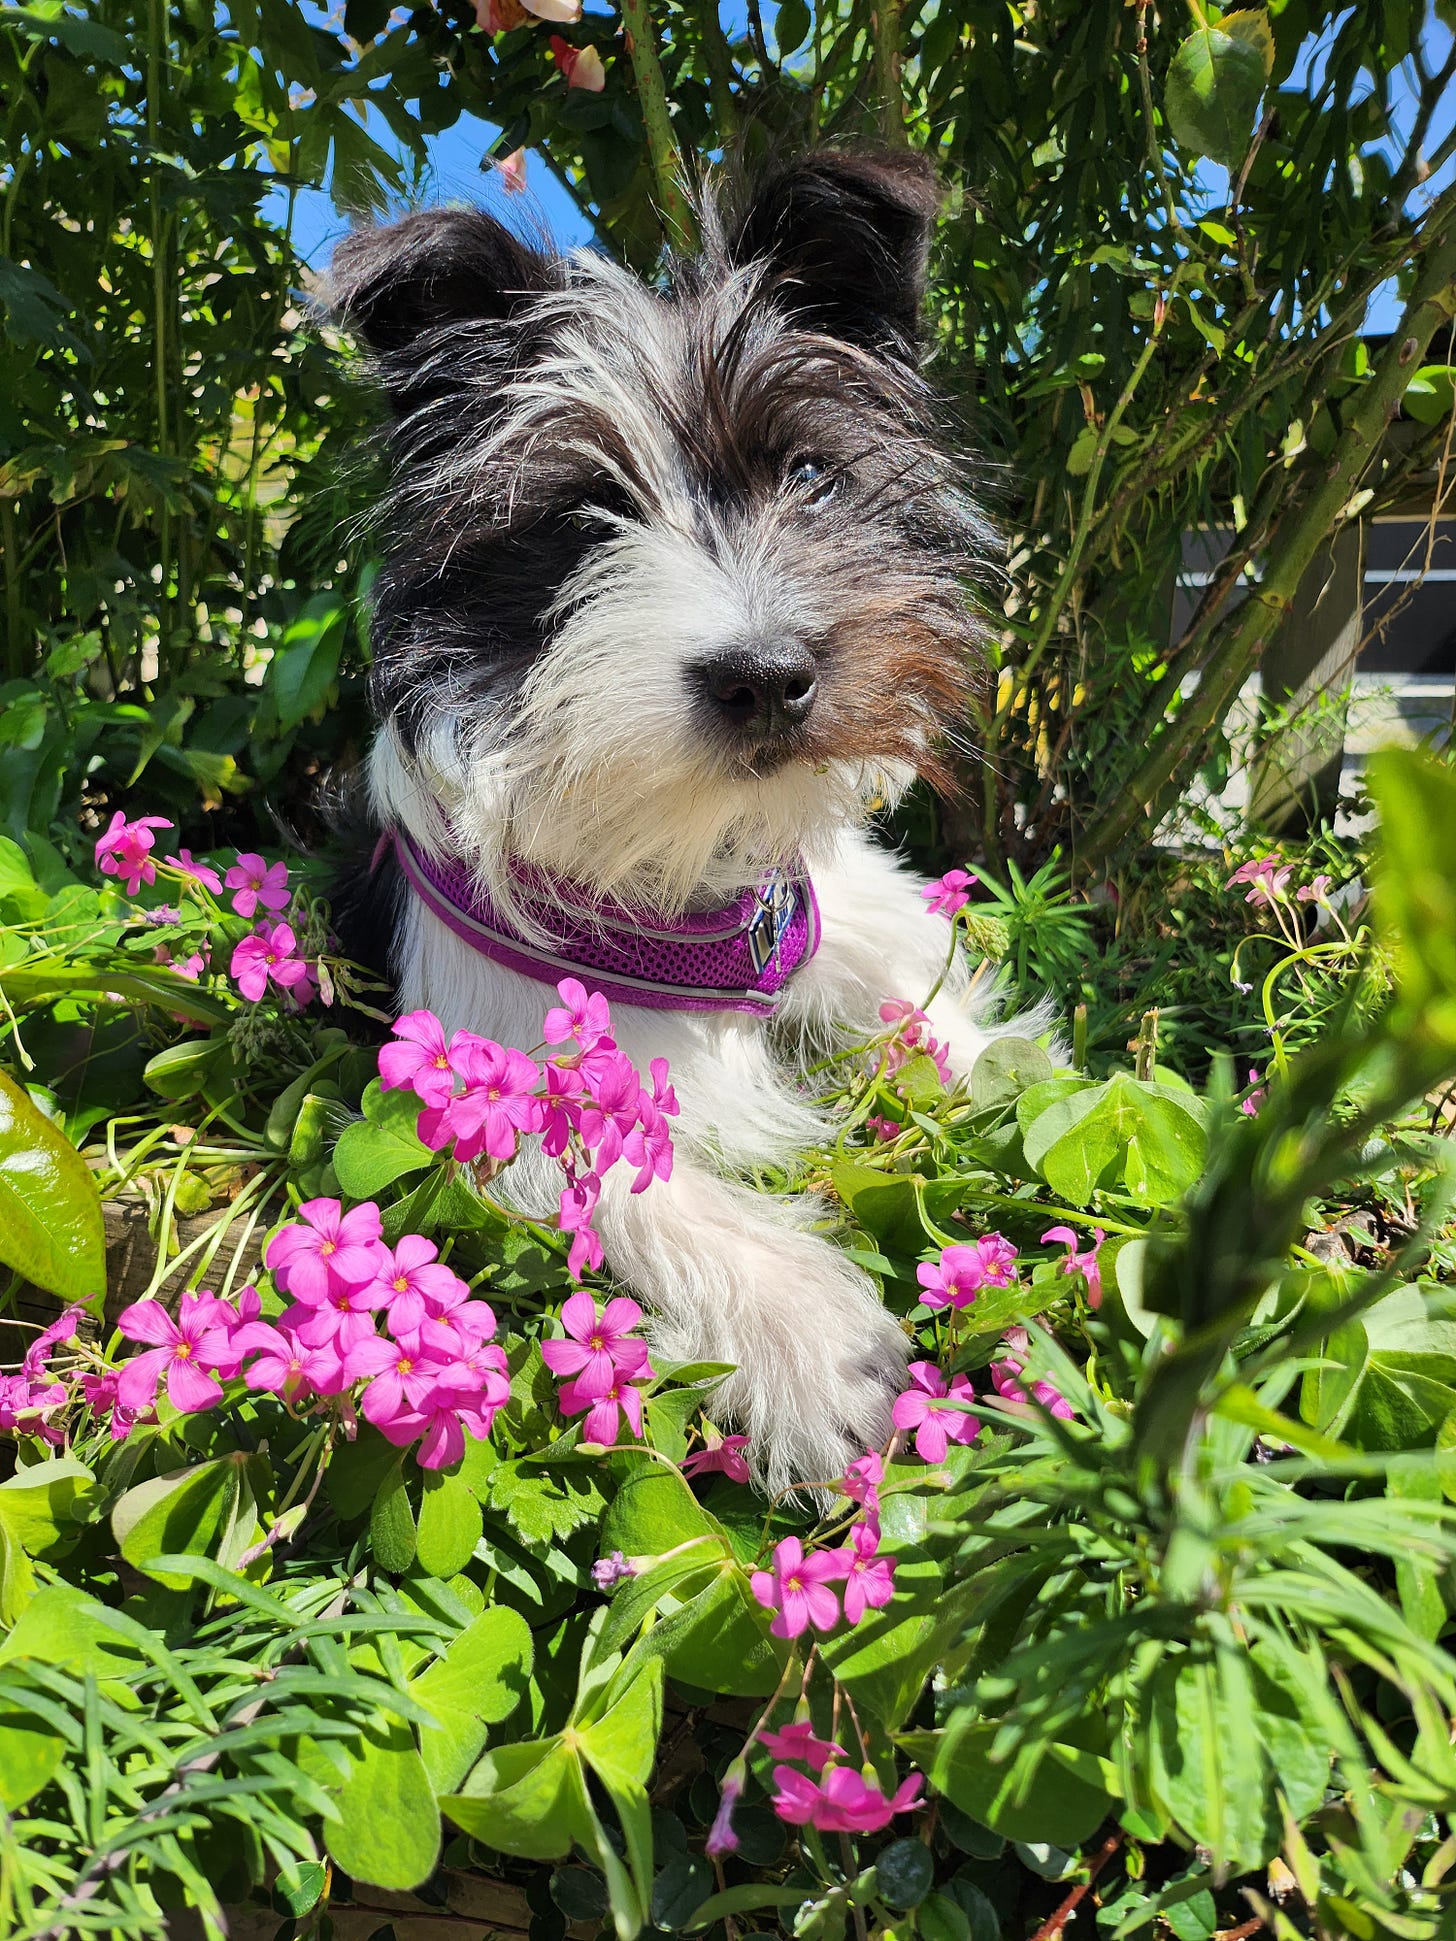 A black and white puppy sits in a flowerbed of bright pink flowers against a backdrop of a clear blue sky